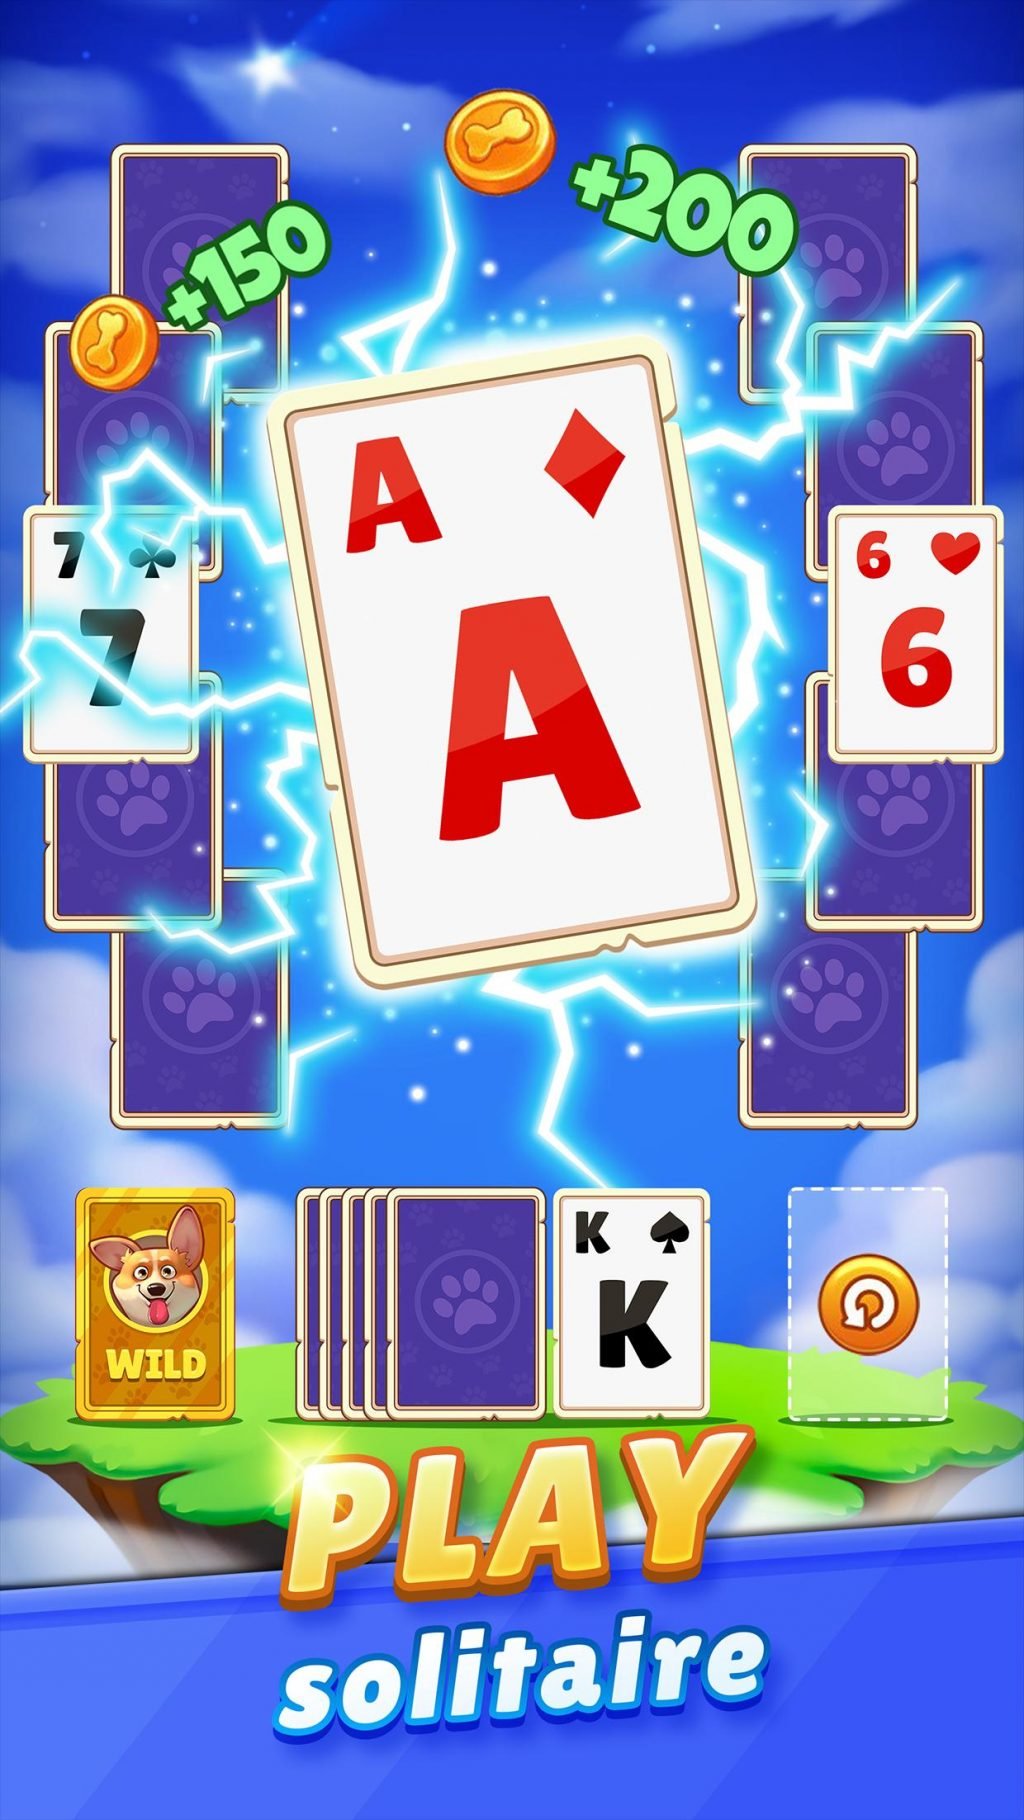 Solitaire Clash (by Pocket7) List of Codes and How to Find More of